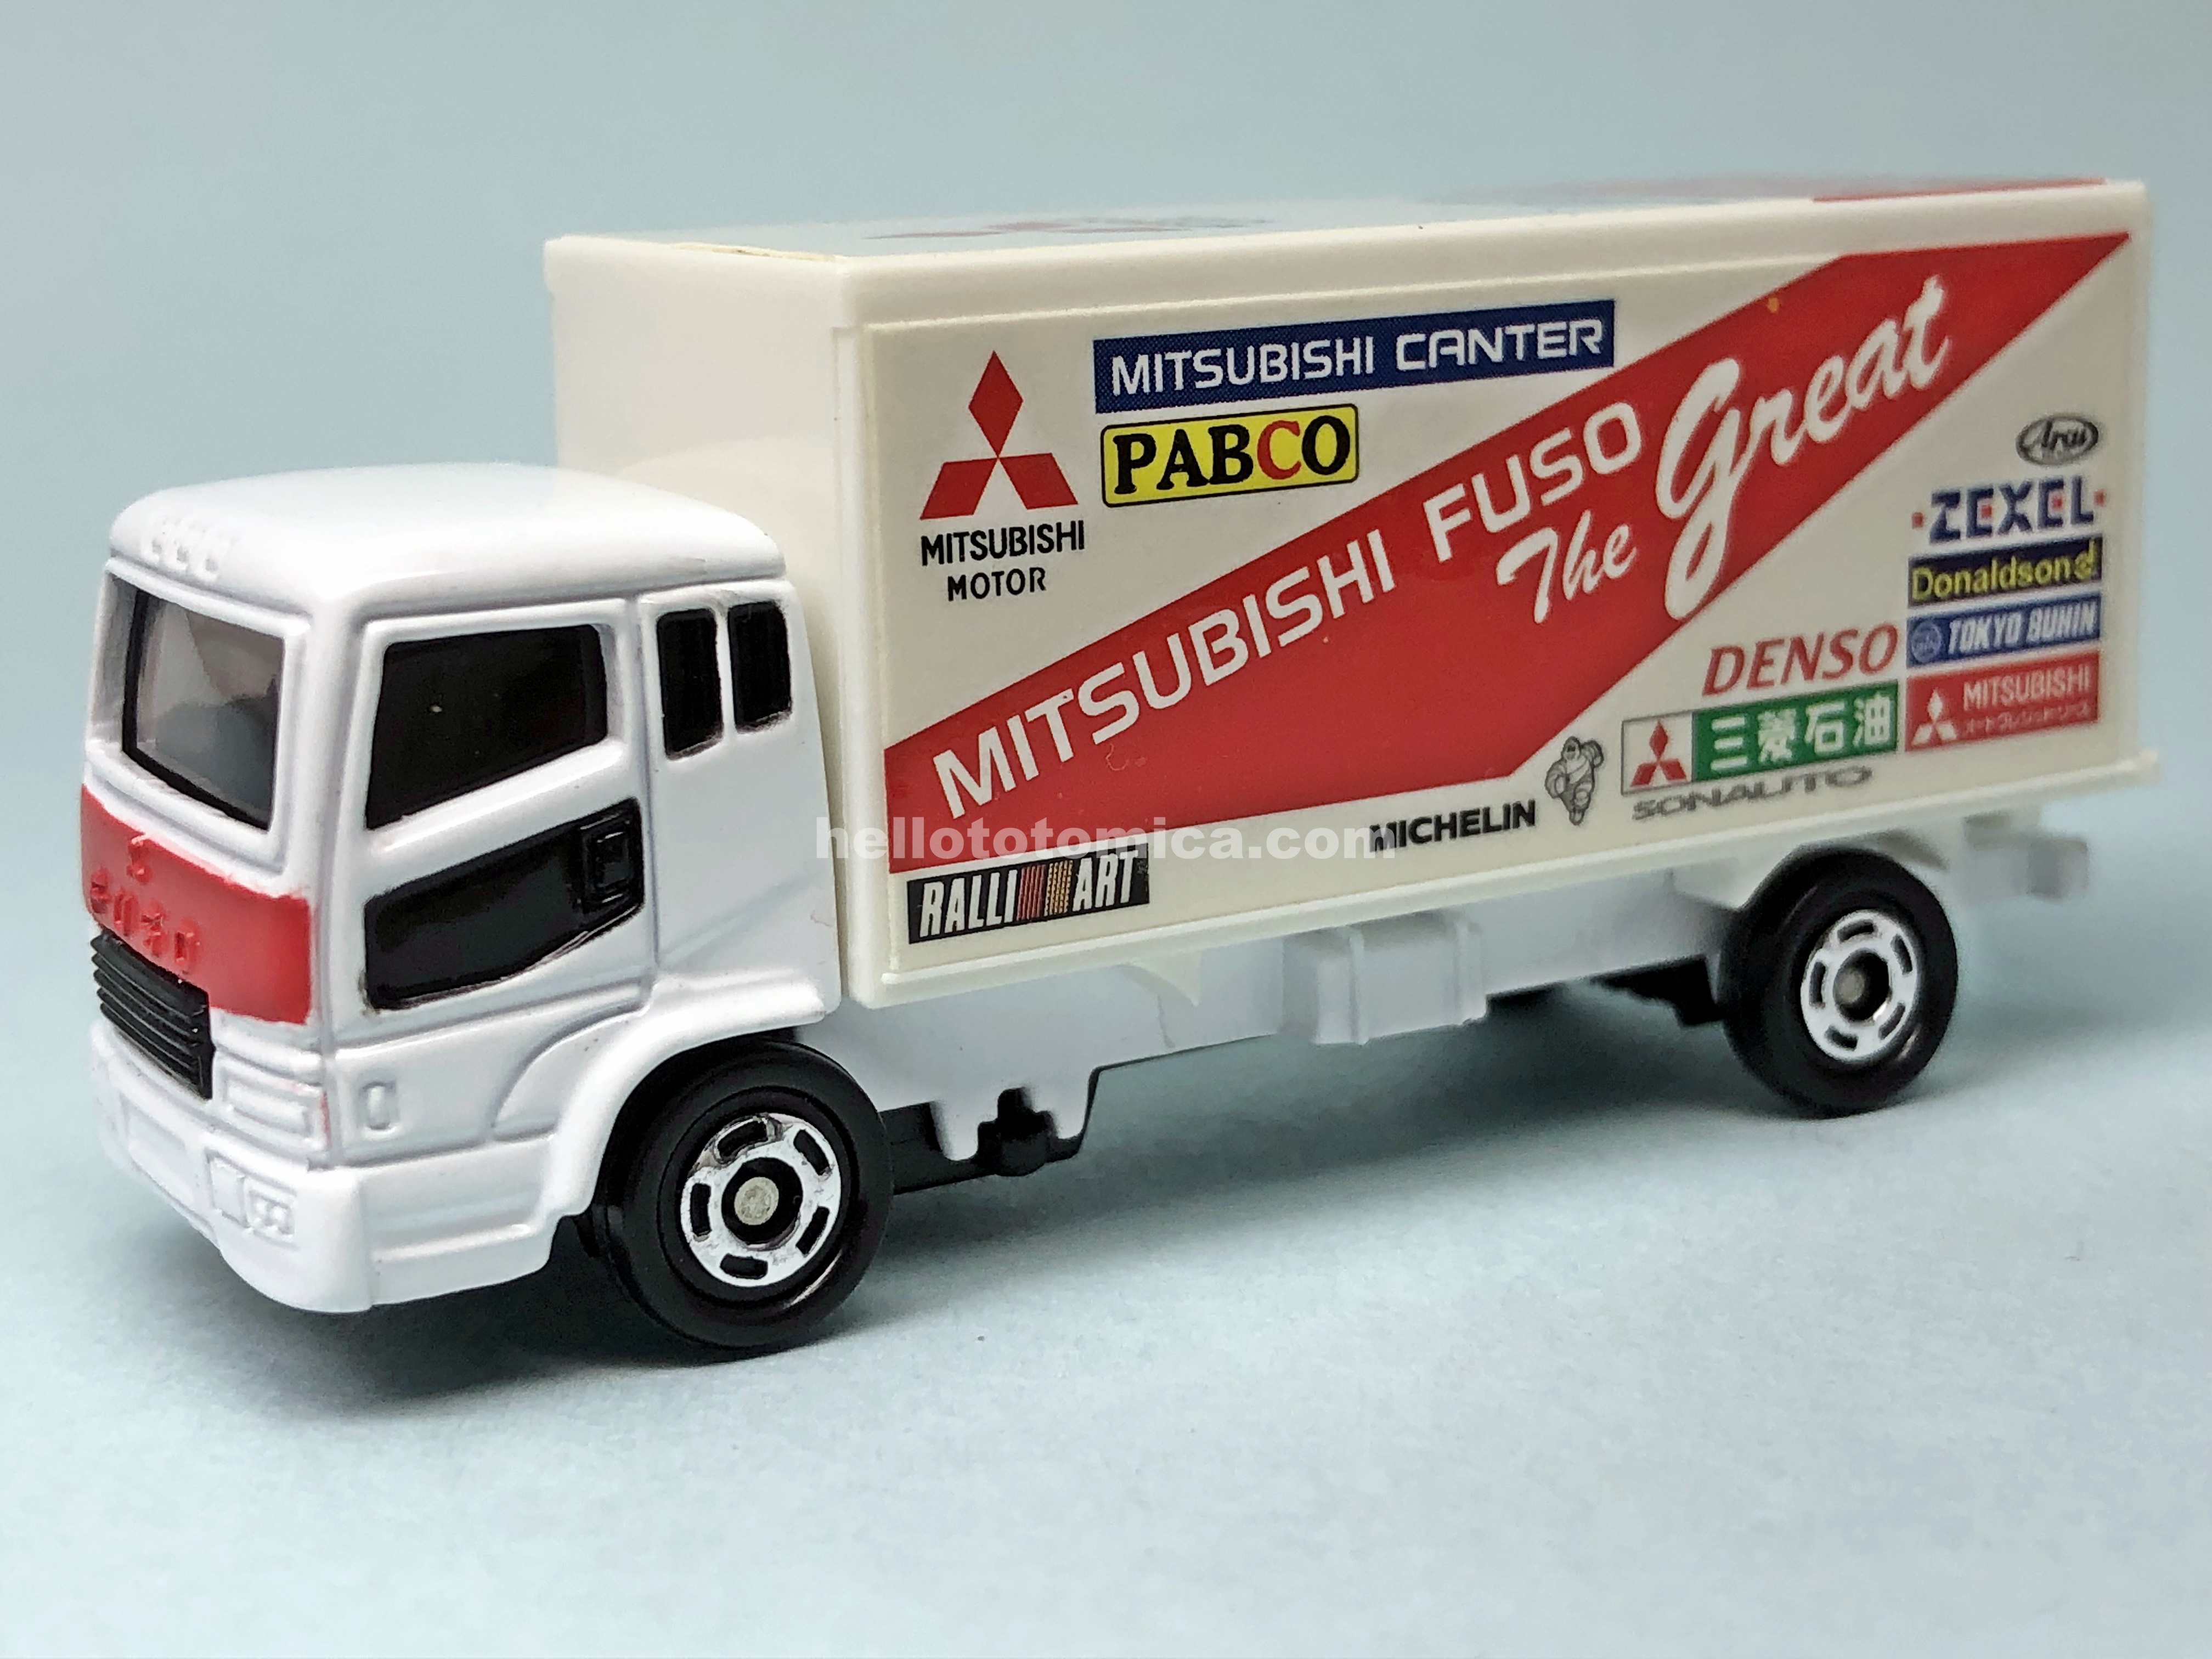 7-4 MITSUBISHI RALLY SUPPORT CAMION